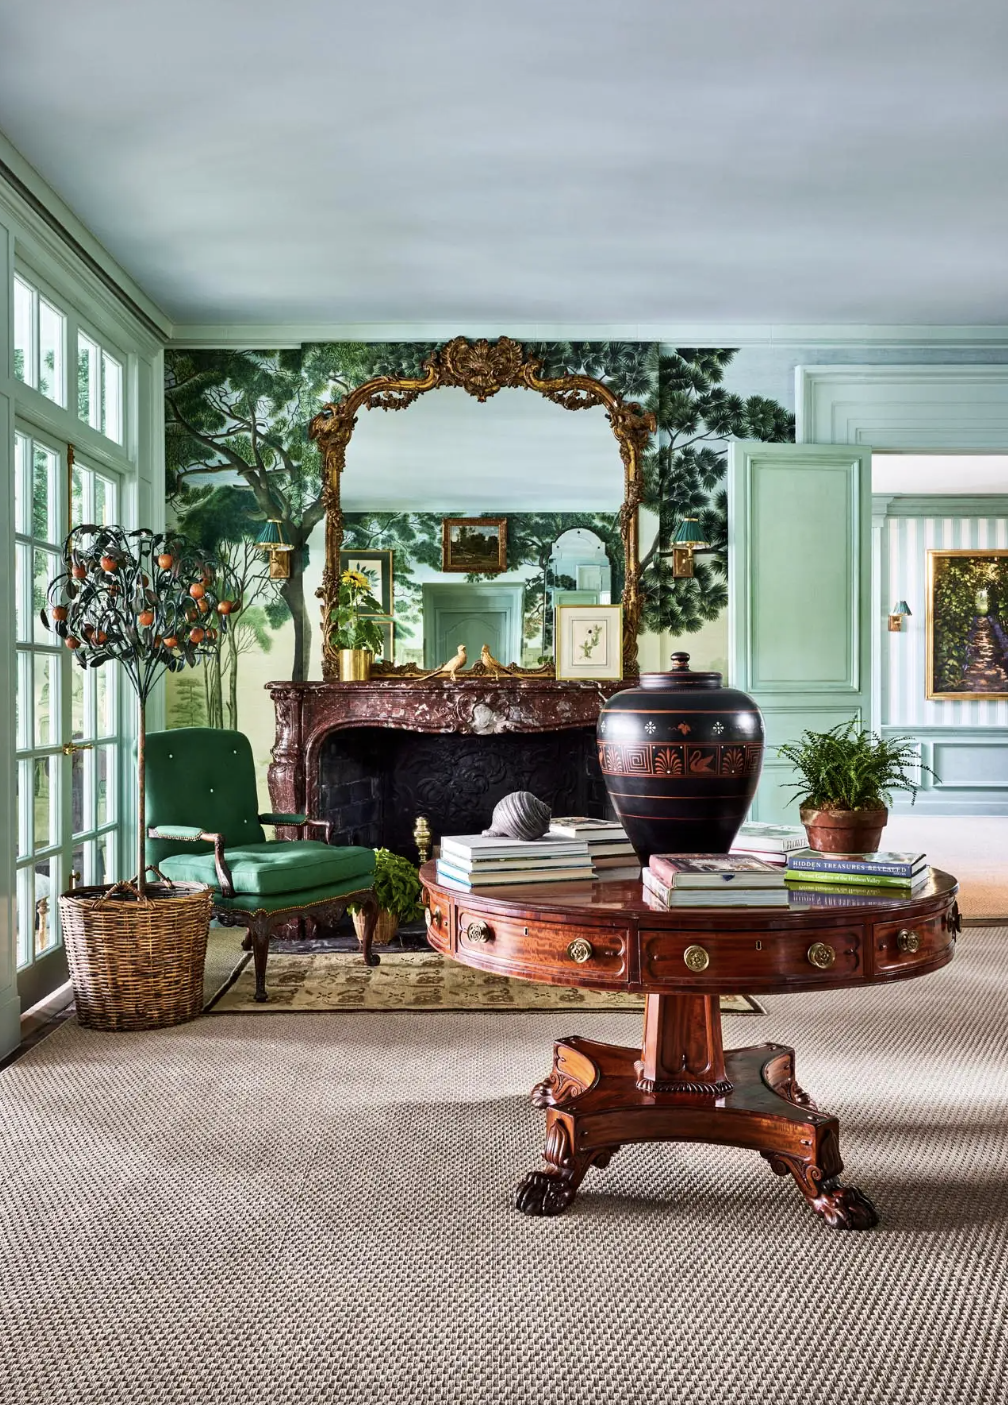 Glamor of Vintage Furniture: How to Capture Classic Style 